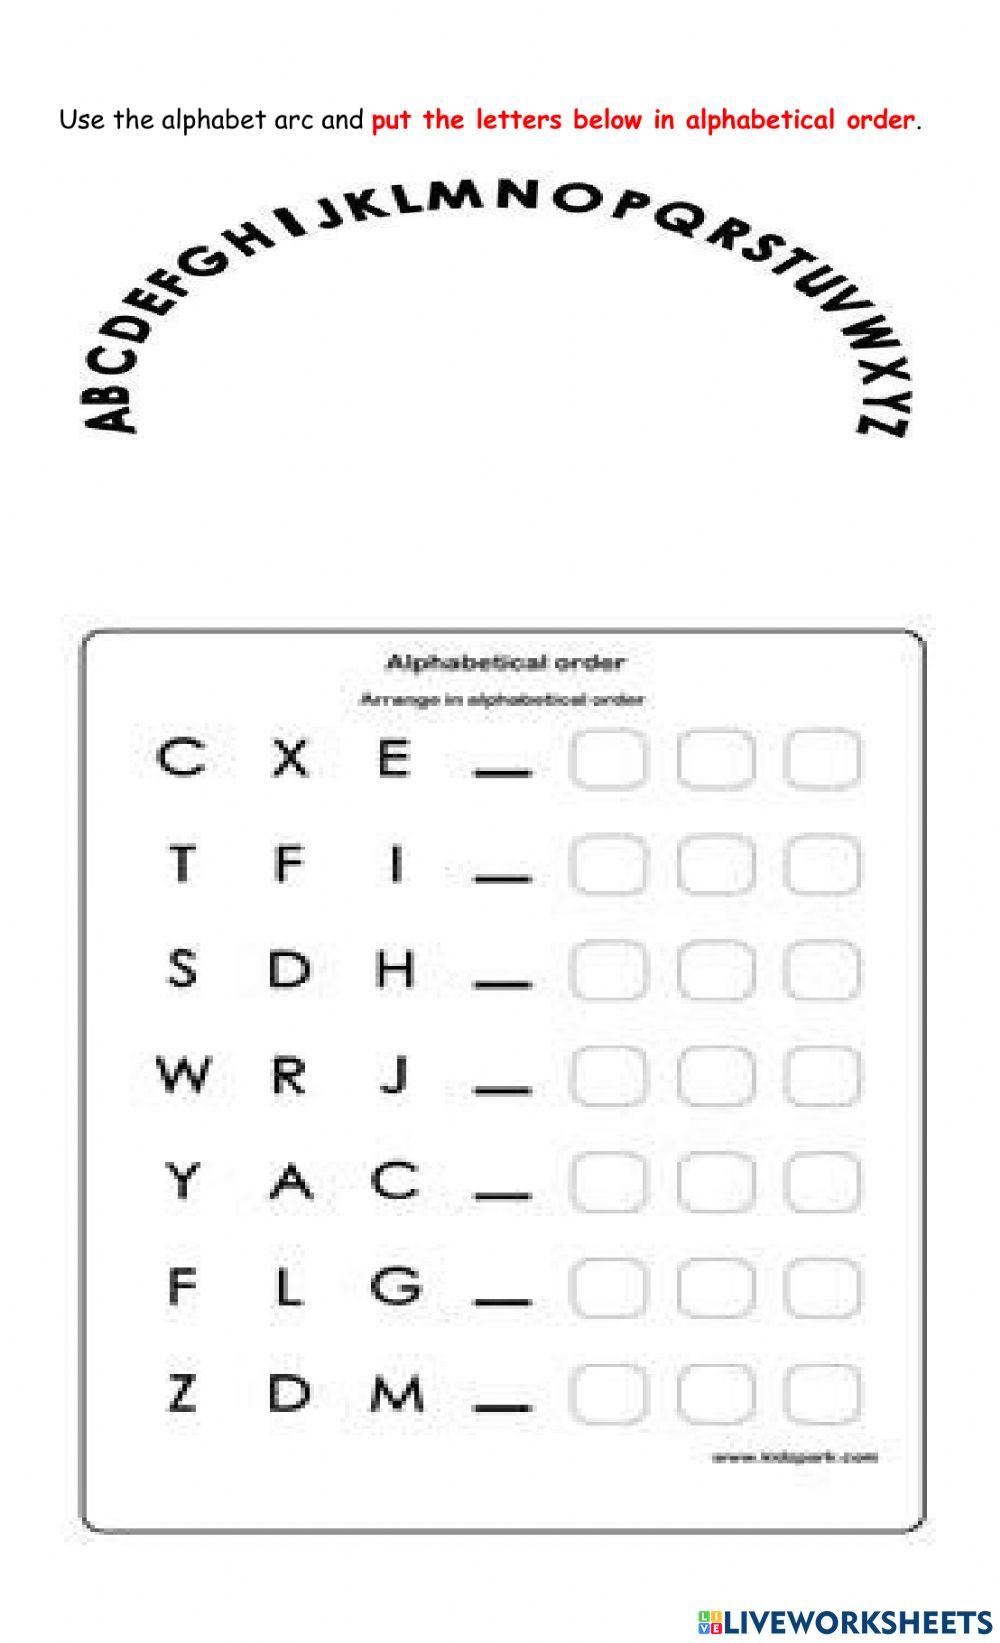 Sequence letters of the alphabet online exercise for